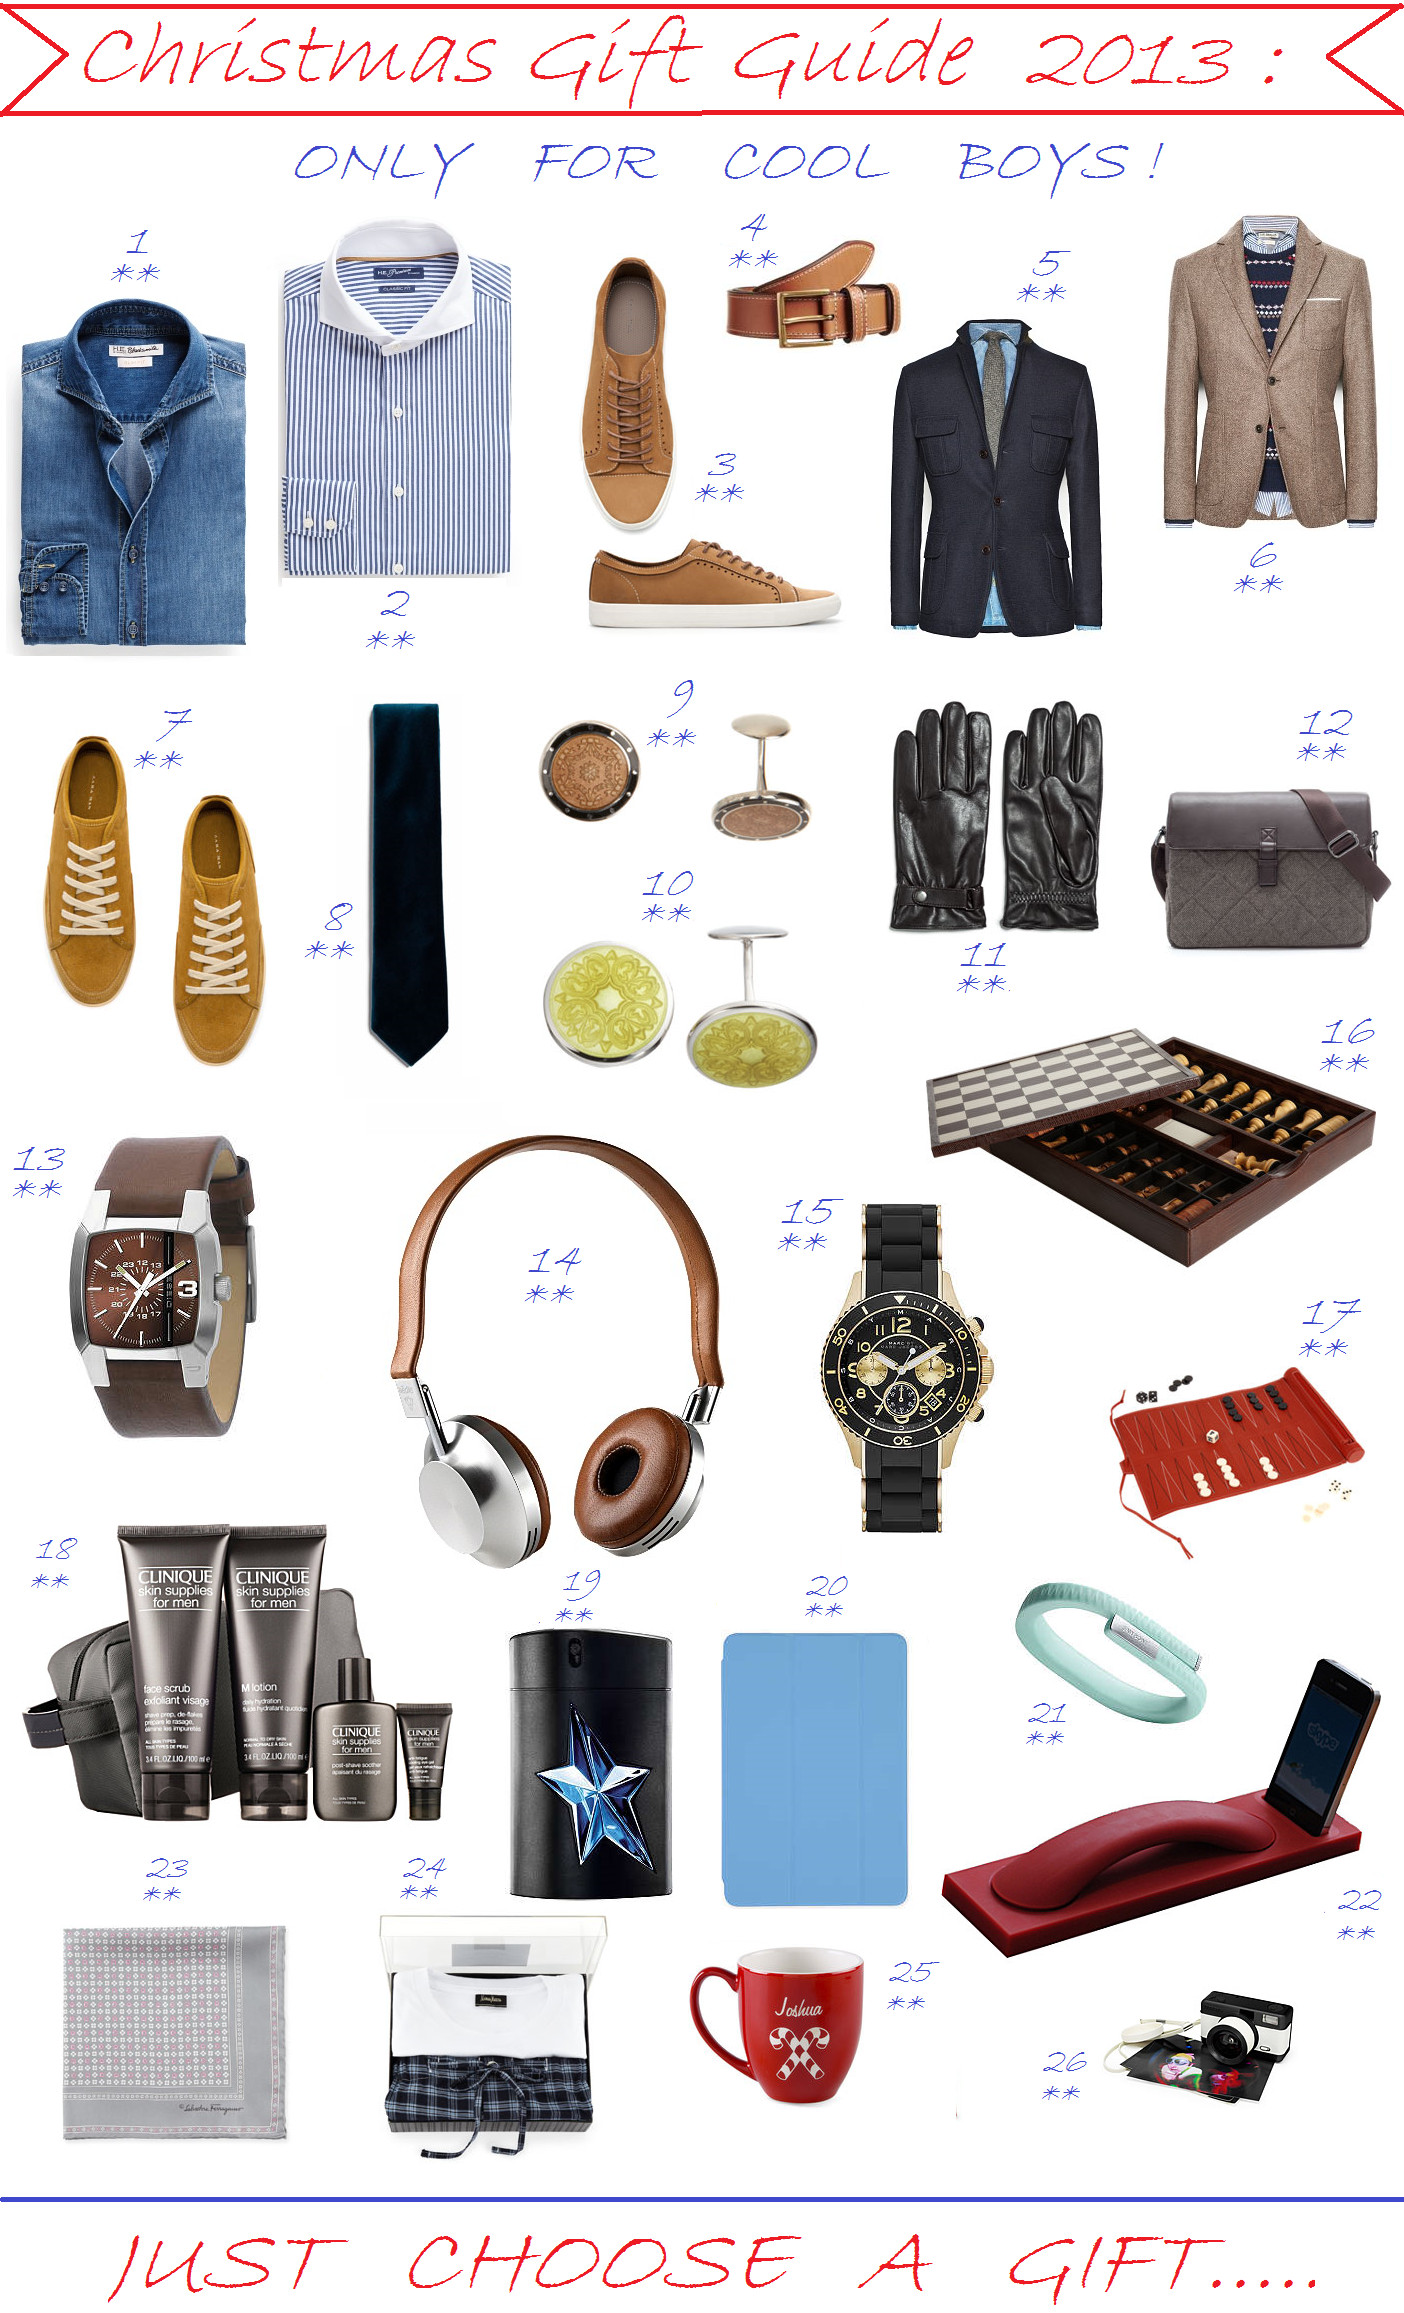 Xmas Gift Ideas For Boys
 CHRISTMAS GIFT GUIDE 2013 ONLY FOR COOL BOYS